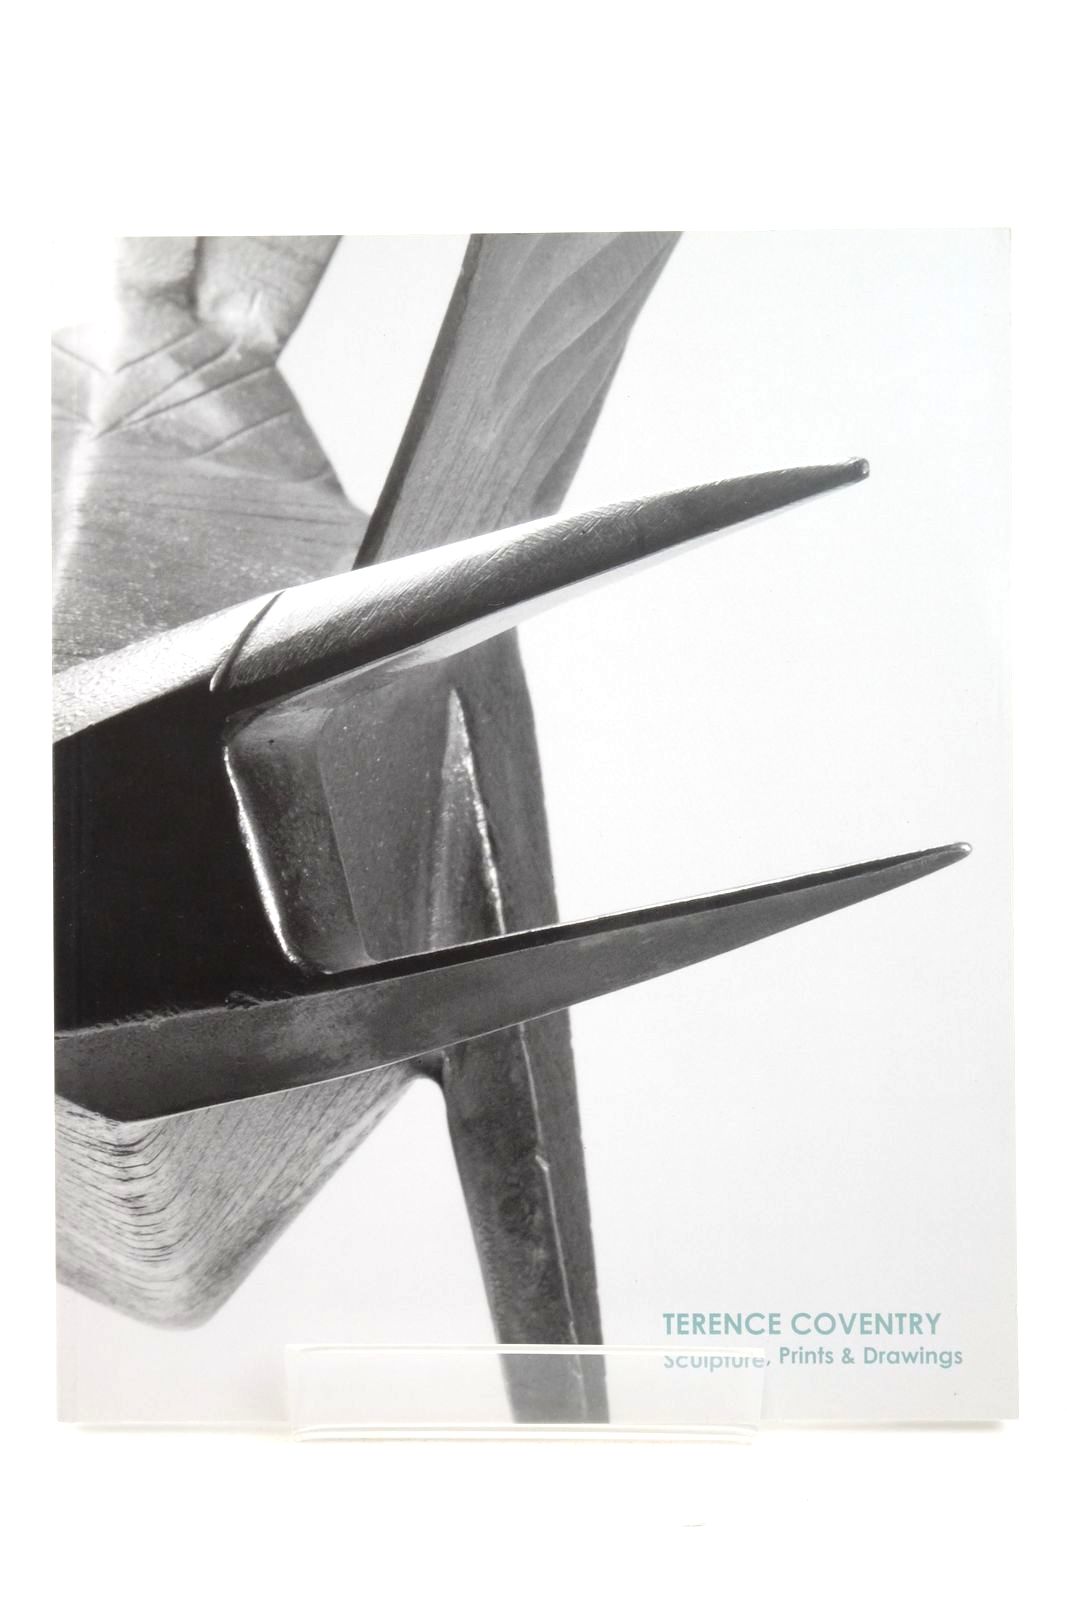 Photo of TERENCE COVENTRY: SCULPTURE, PRINTS &amp; DRAWINGS written by Kingdon, Rungwe illustrated by Coventry, Terence published by Pangolin London (STOCK CODE: 2136708)  for sale by Stella & Rose's Books